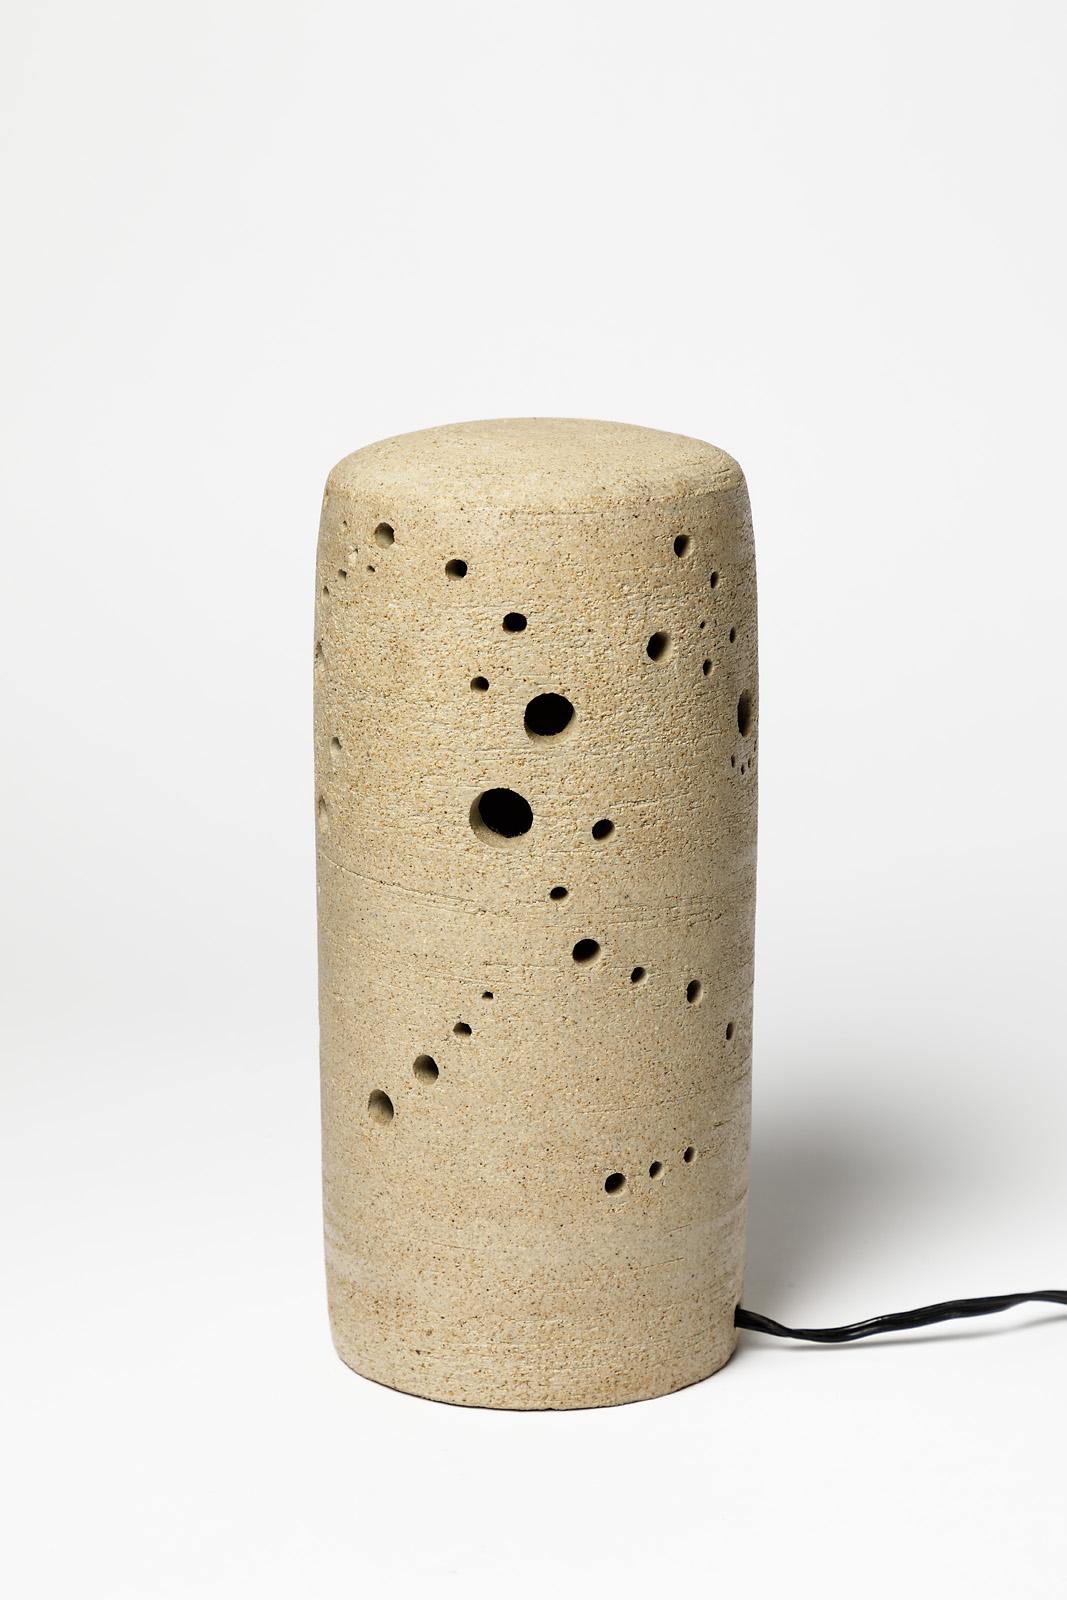 Realised circa 1970

Original sculptural ceramic table lamp realised by french ceramicist

White ceramic color

Perforated ceramic form

Original perfect condition

Measures: Height : 25 cm large : 11 cm.